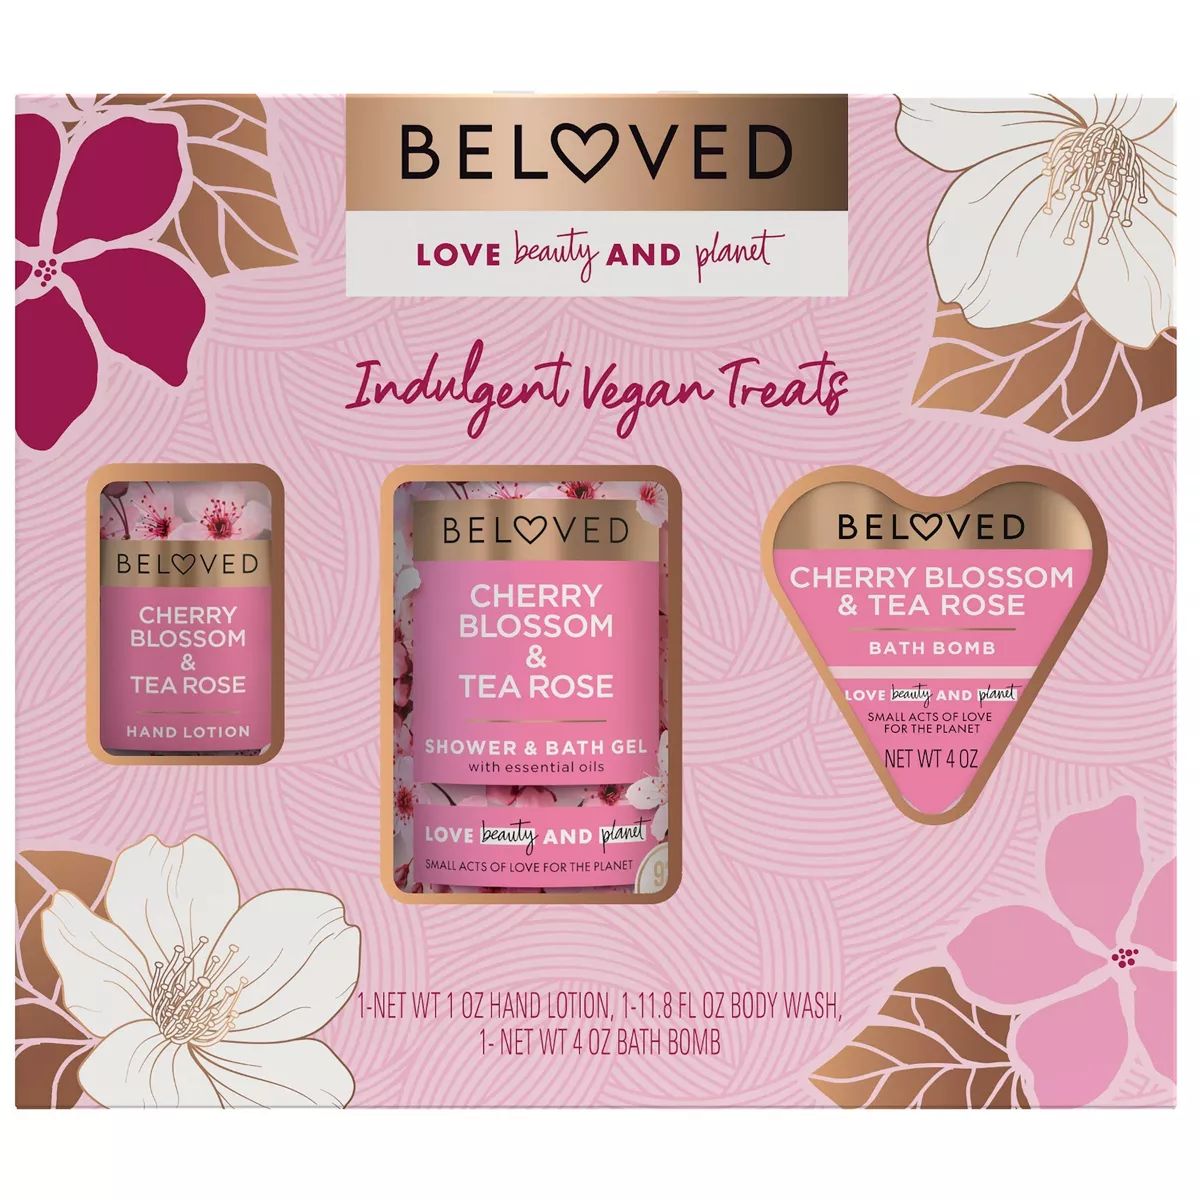 Beloved Cherry Blossom Bath and Body Gift Set - 3pc | Target